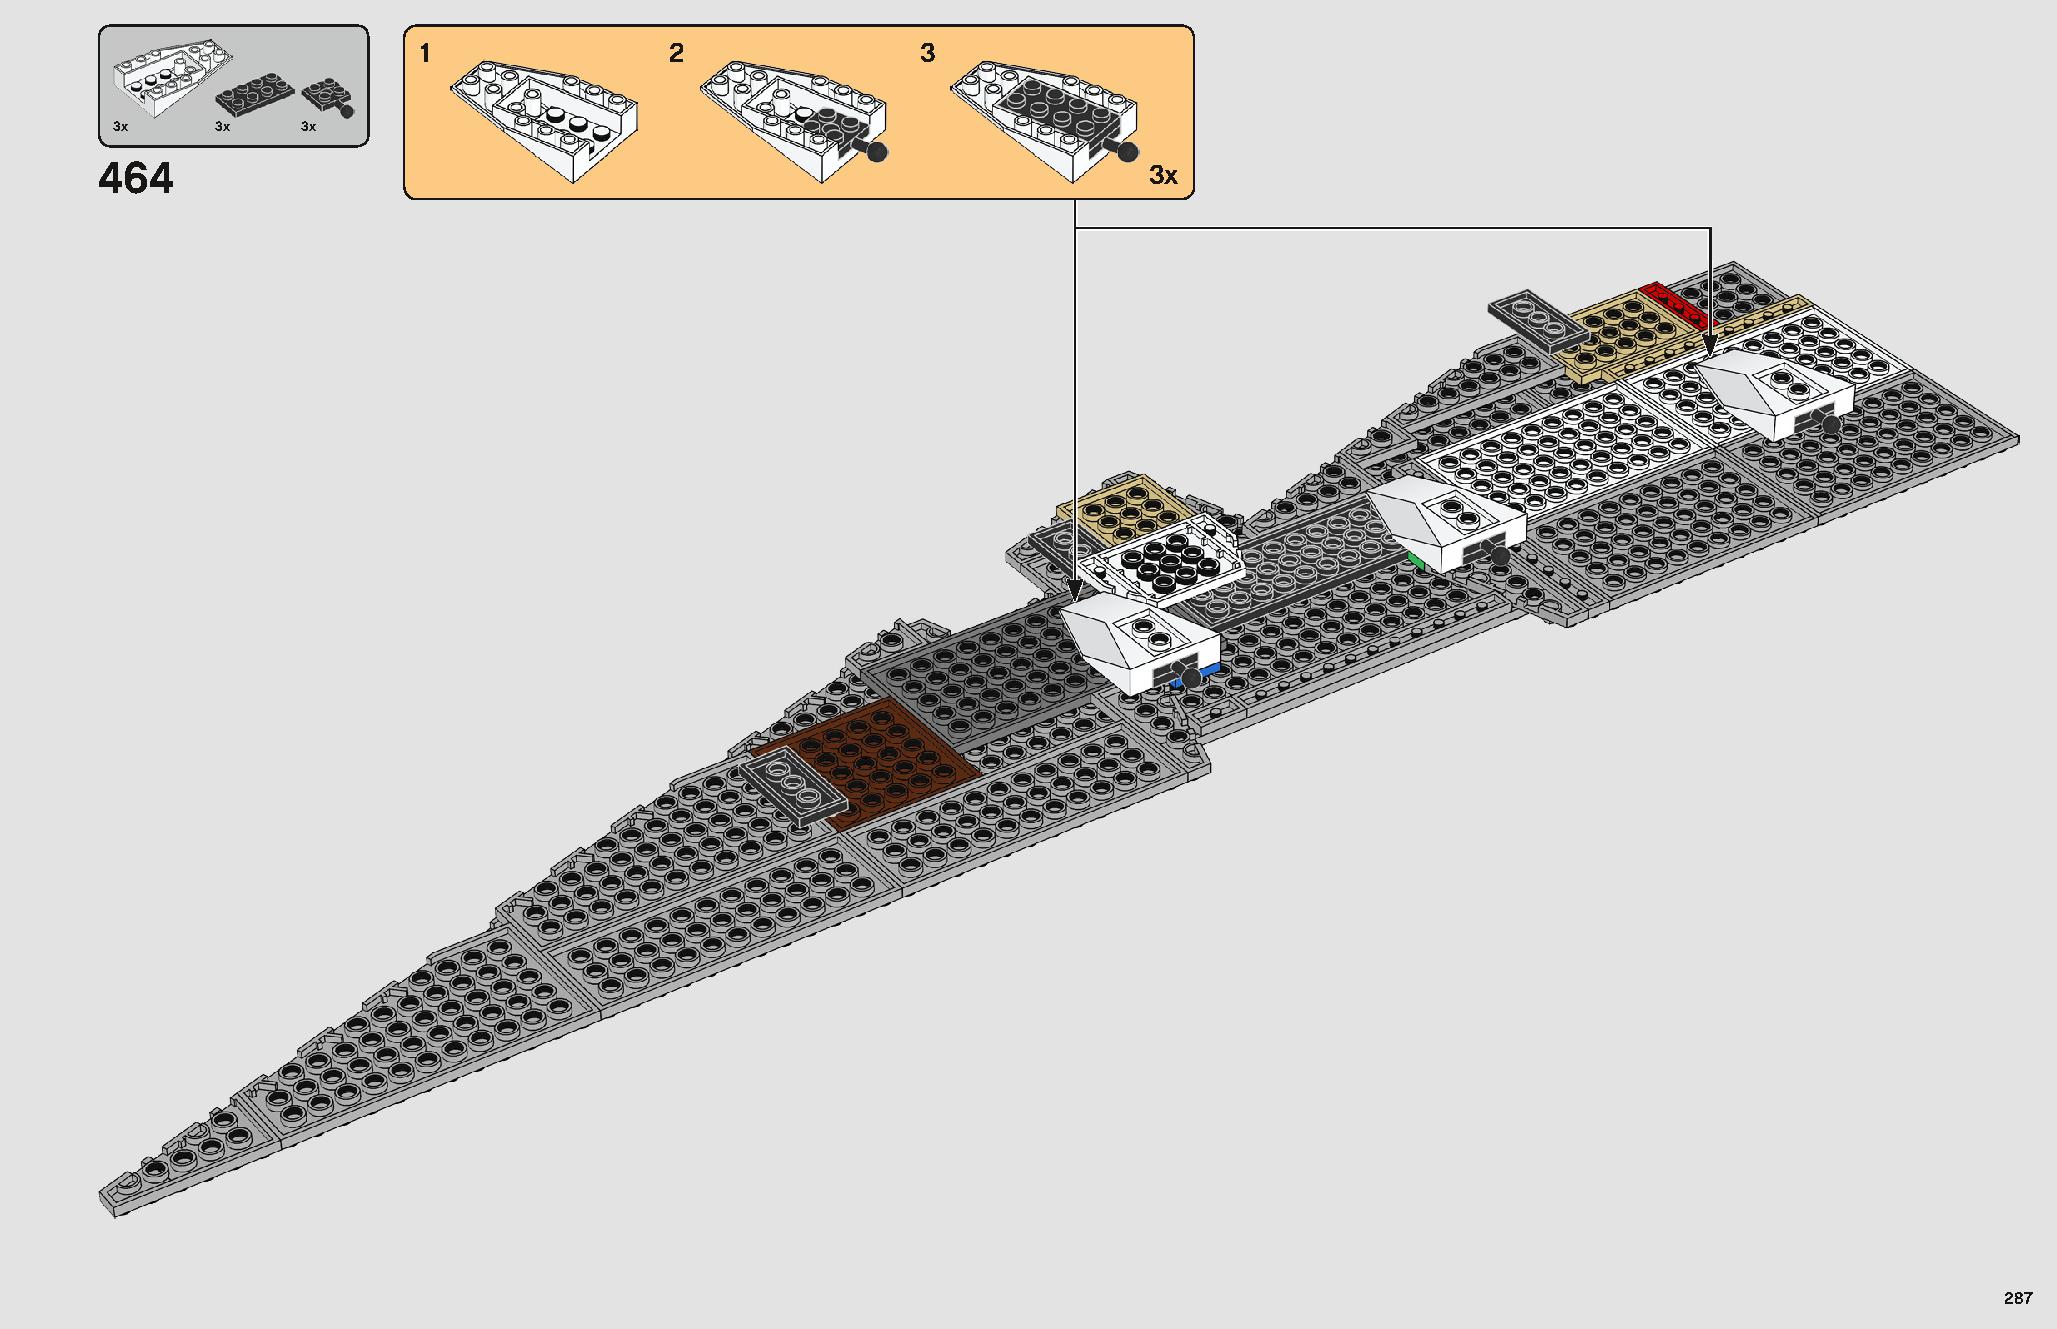 Imperial Star Destroyer 75252 LEGO information LEGO instructions 287 page